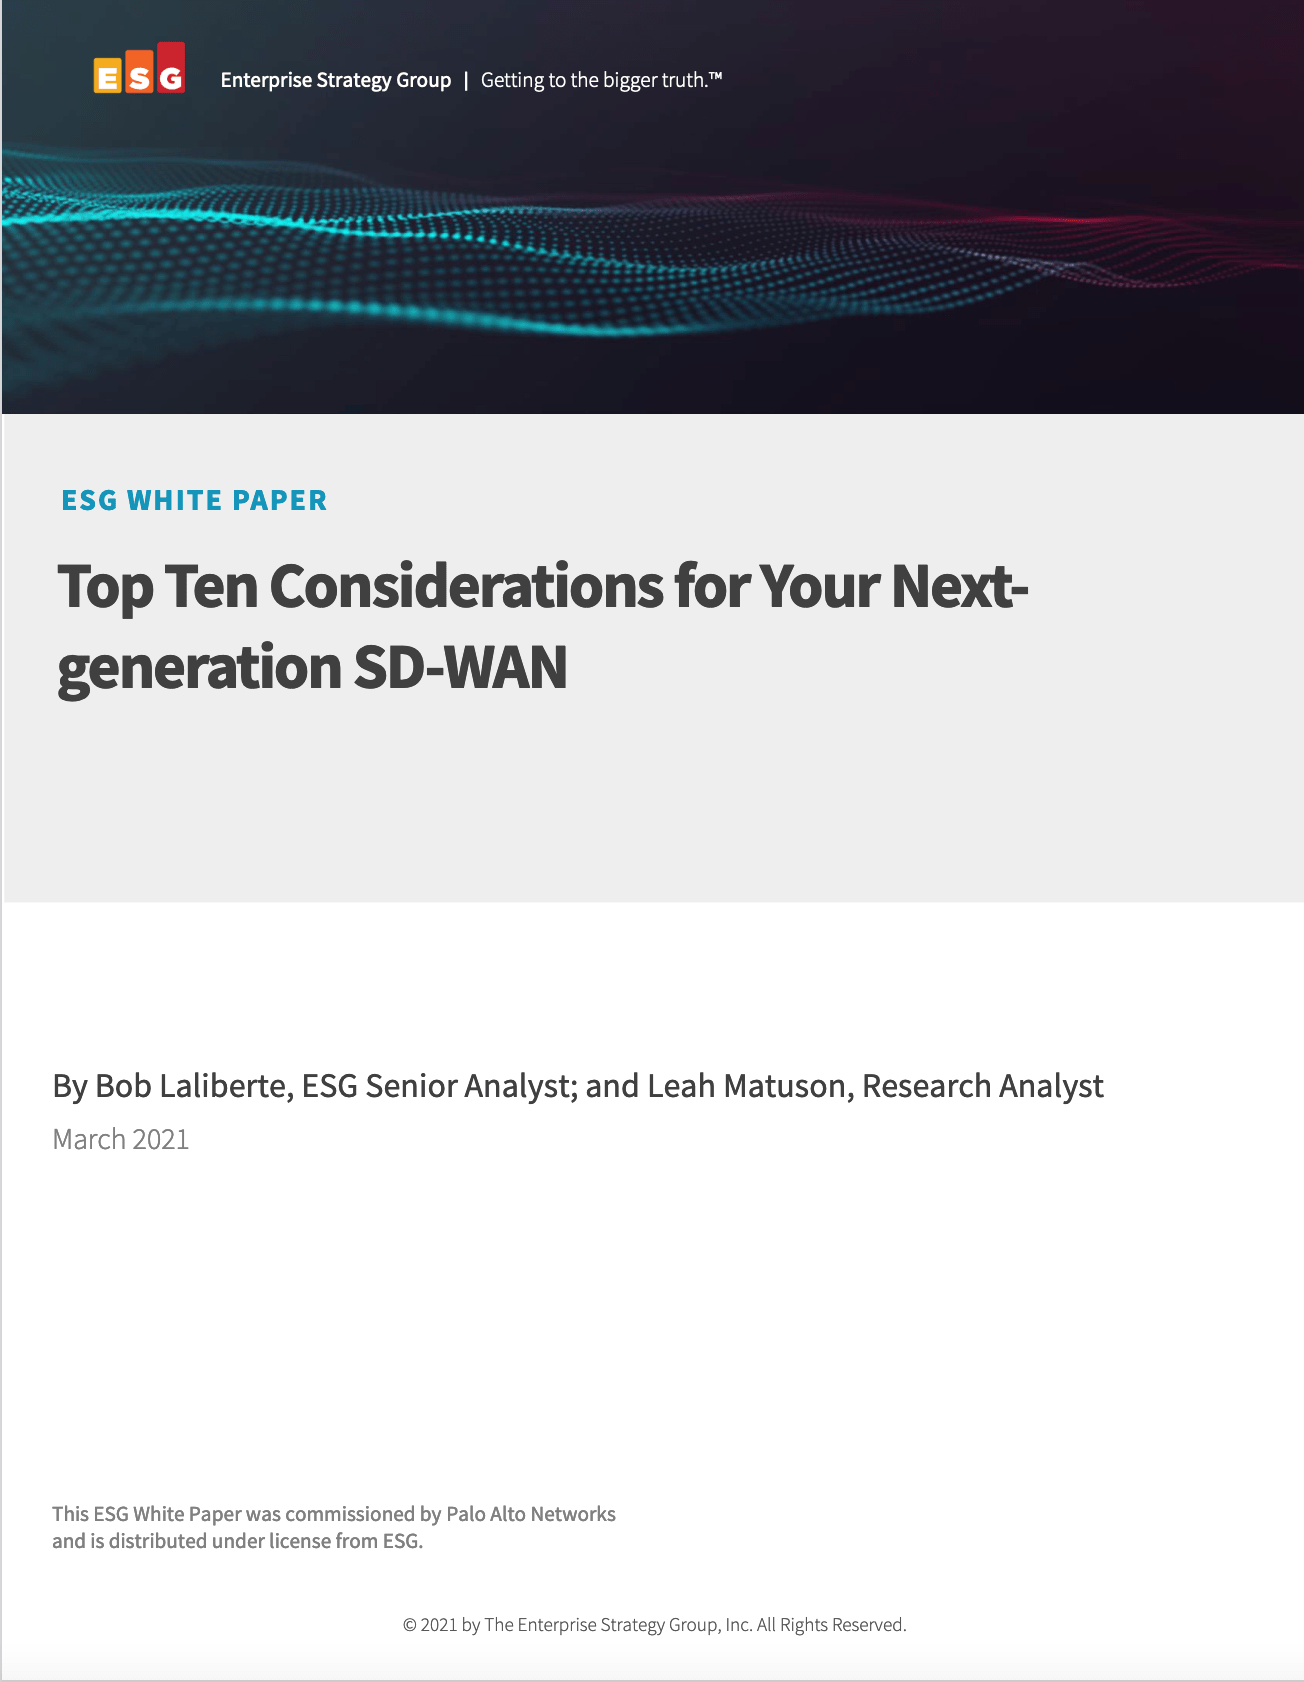 Top Ten Considerations - Top Ten Considerations for Your Next-generation SD-WAN